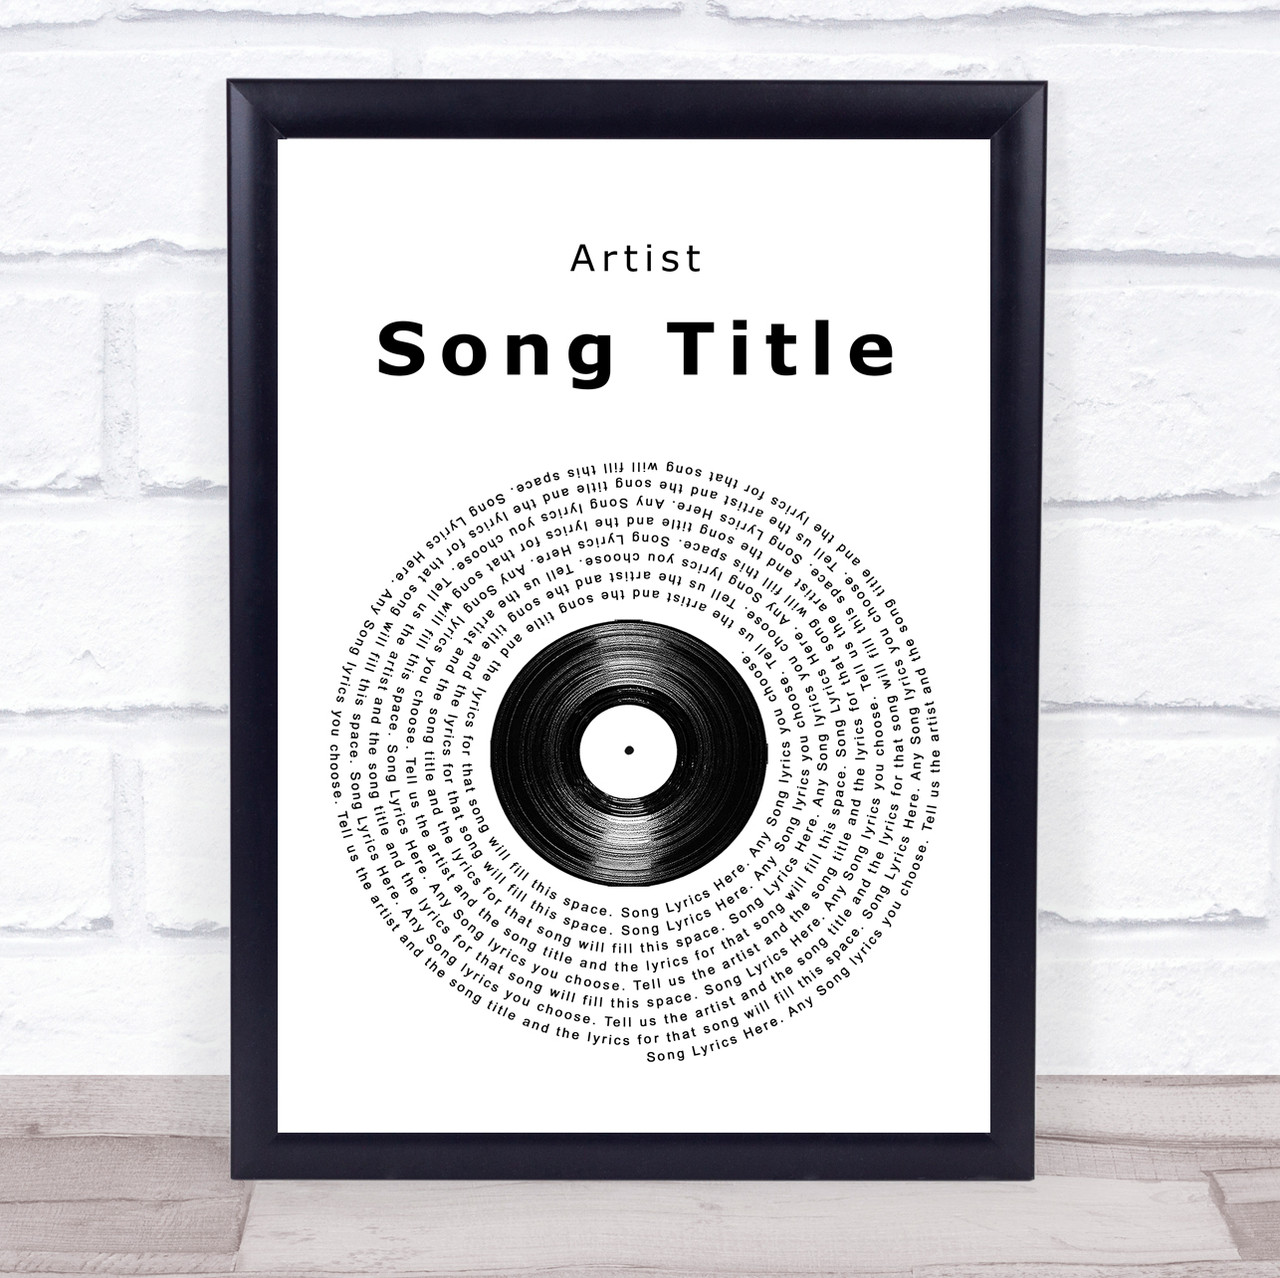 Whitney Houston One Moment in Time Black & Gold Vinyl Record Song Lyric  Print